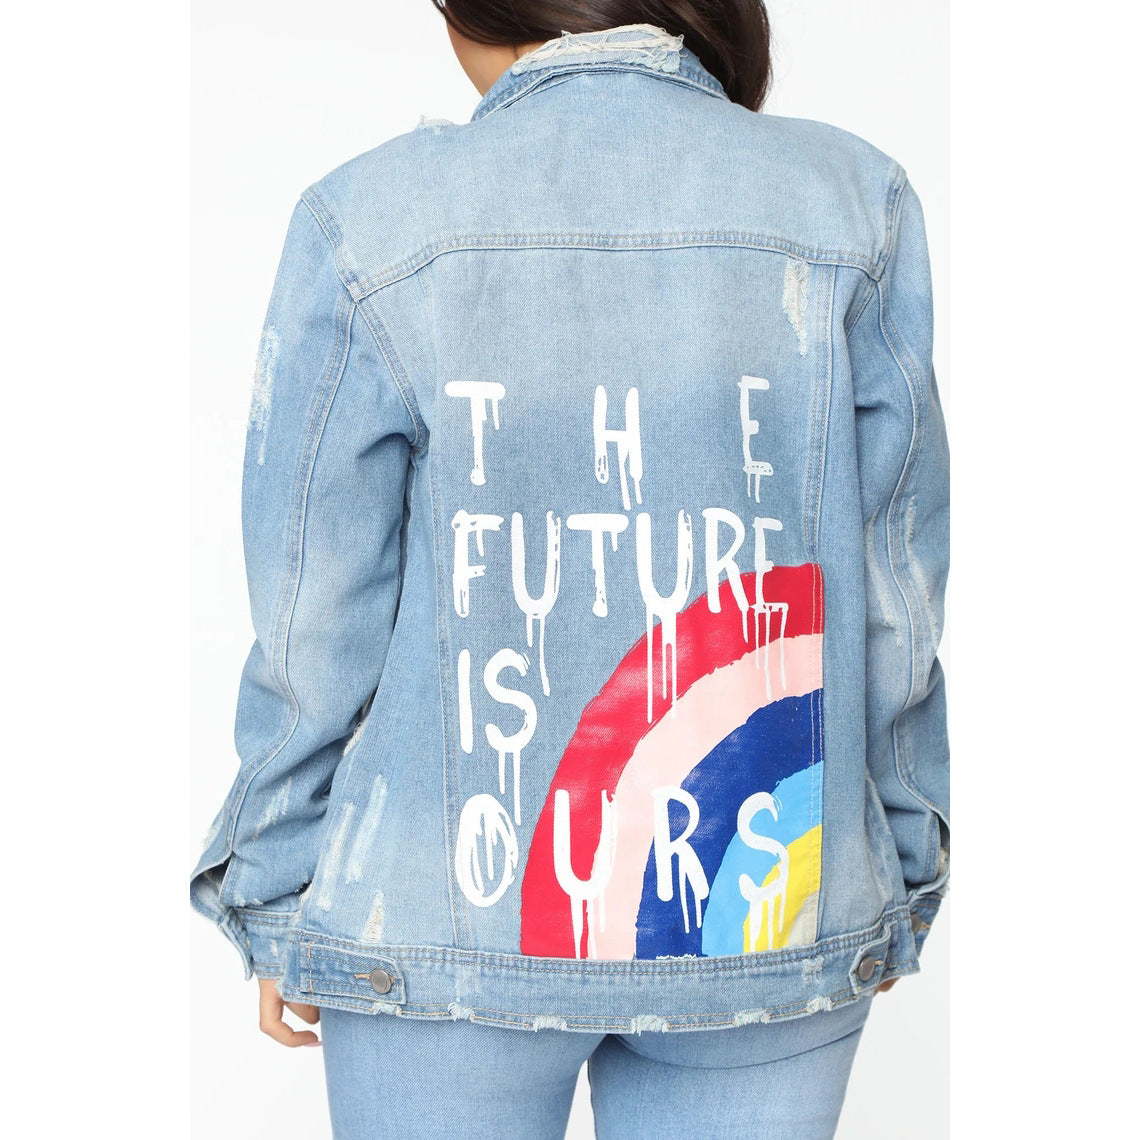 The Future Is Ours Denim Jacket - Rainbow / S - Jackets